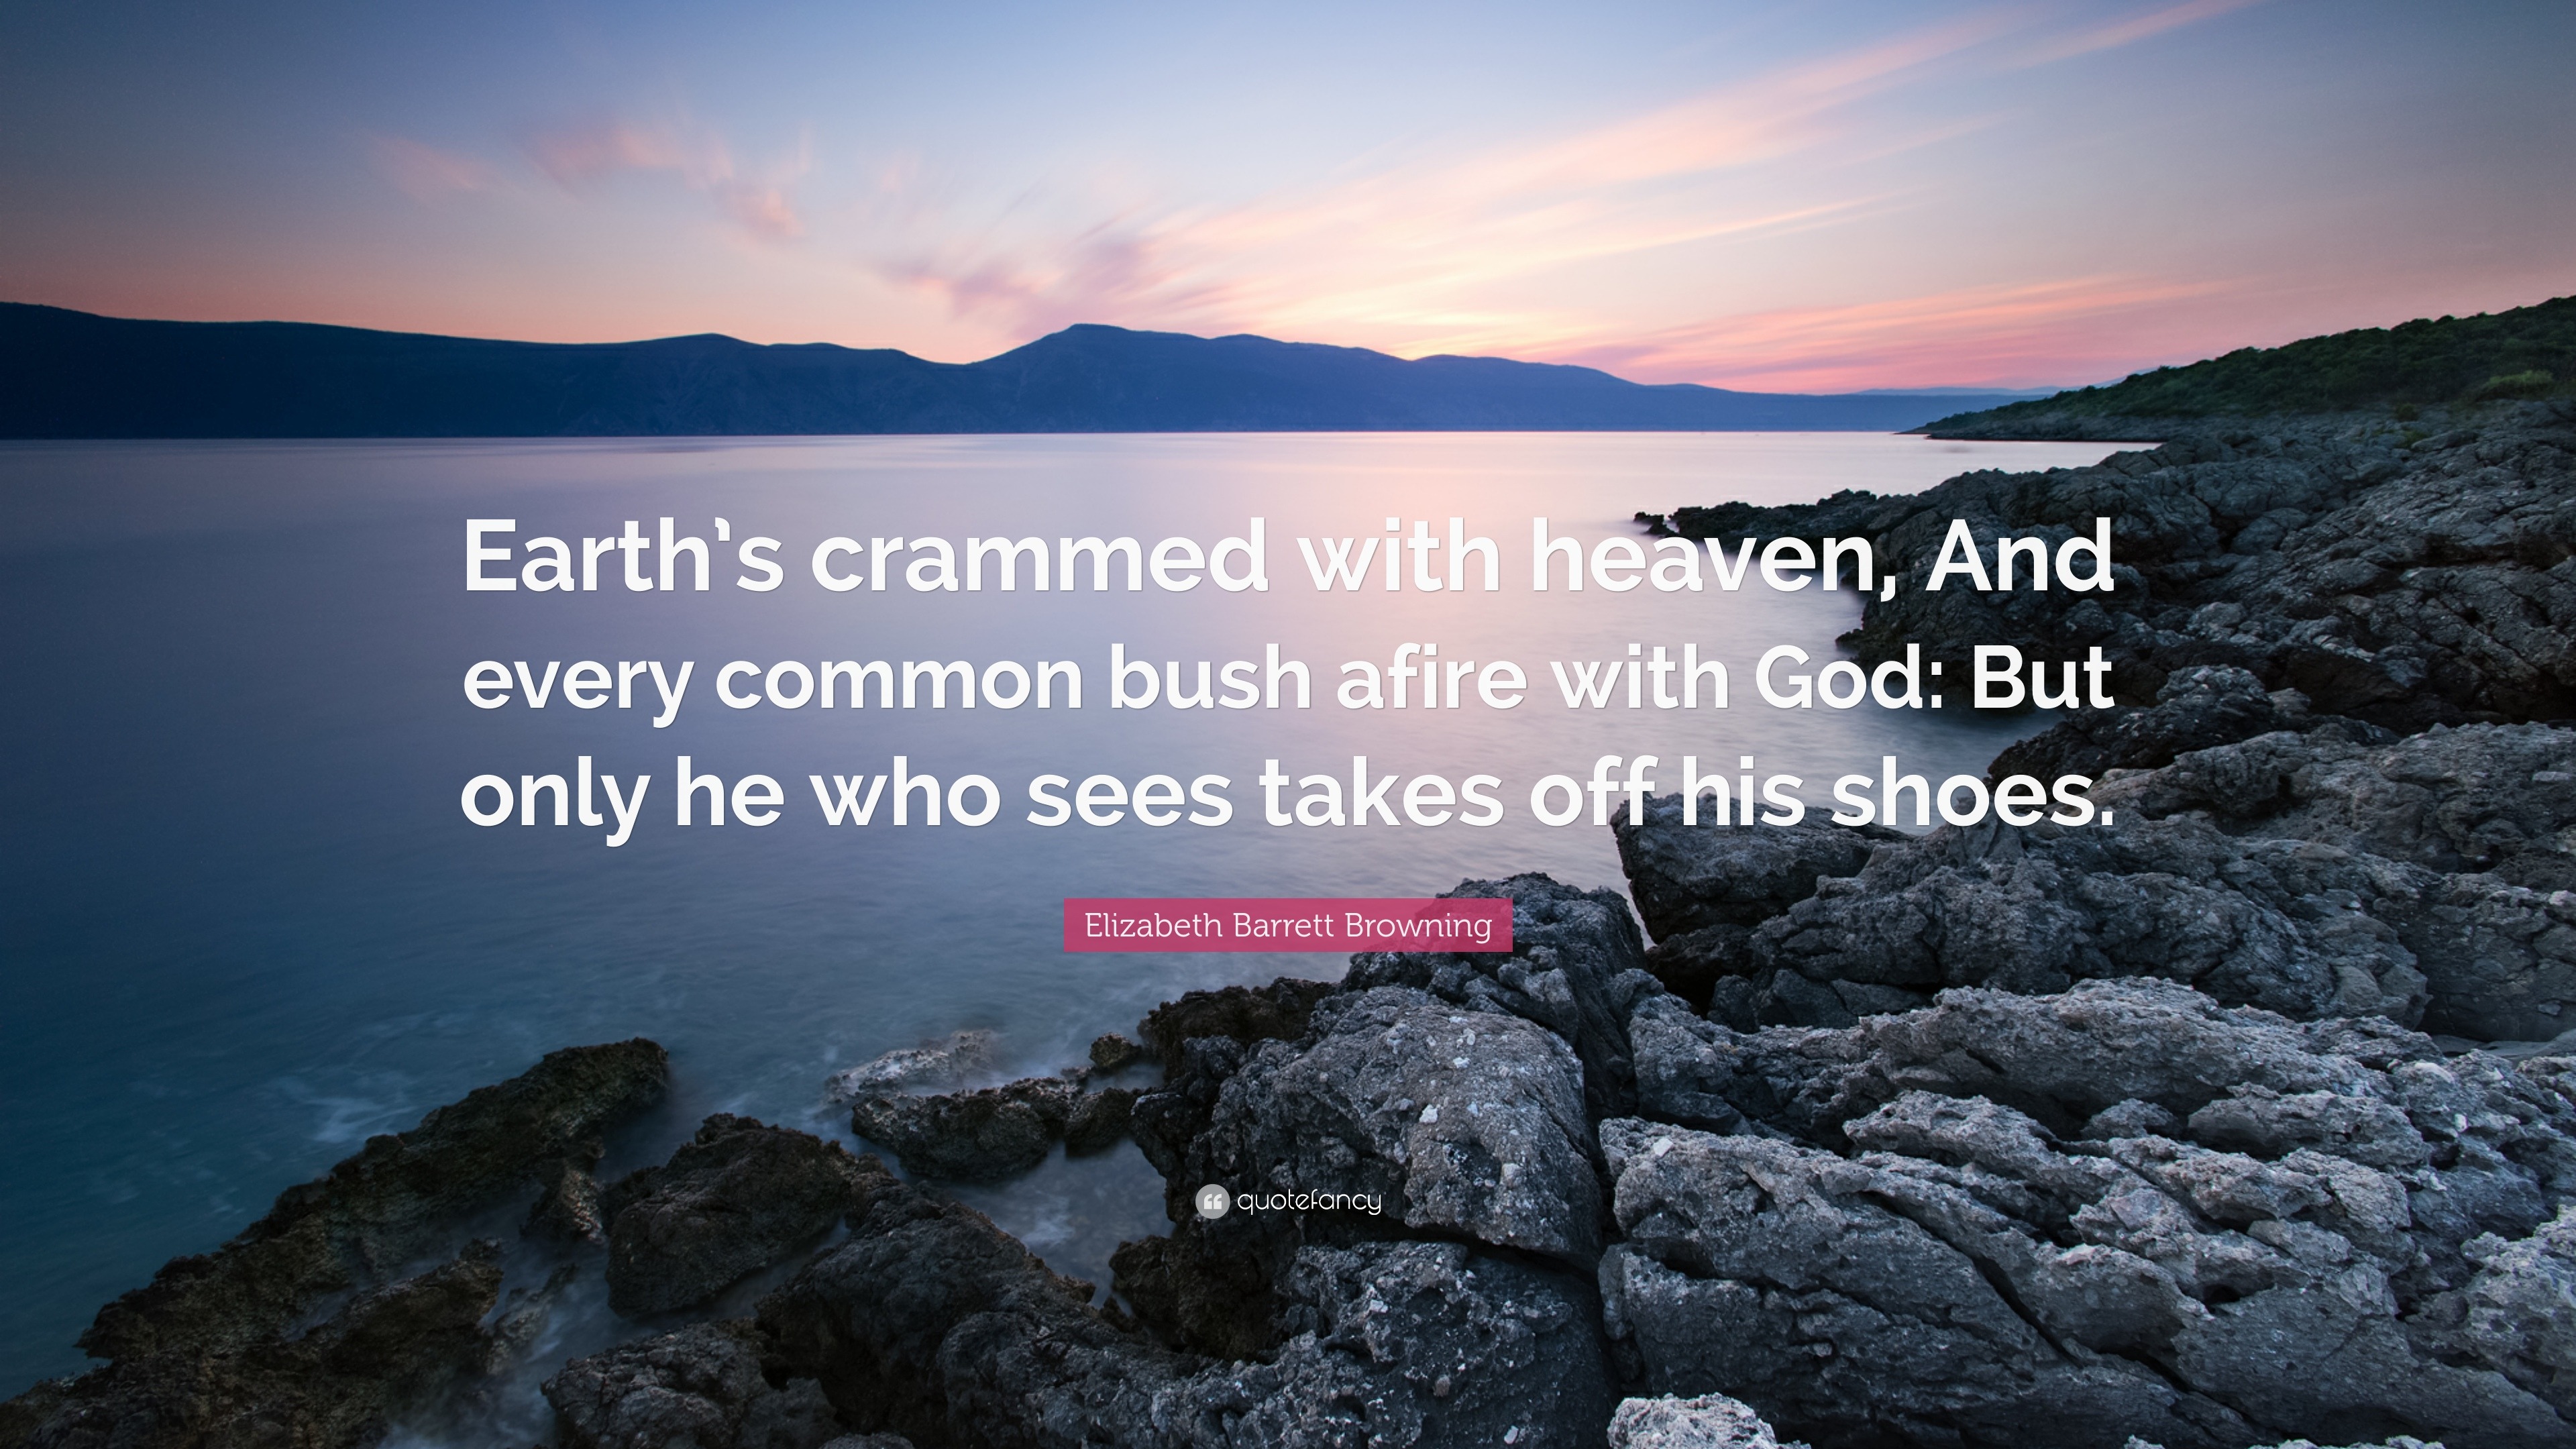 Elizabeth Barrett Browning Quote: “Earth’s crammed with heaven, And every common ...3840 x 2160